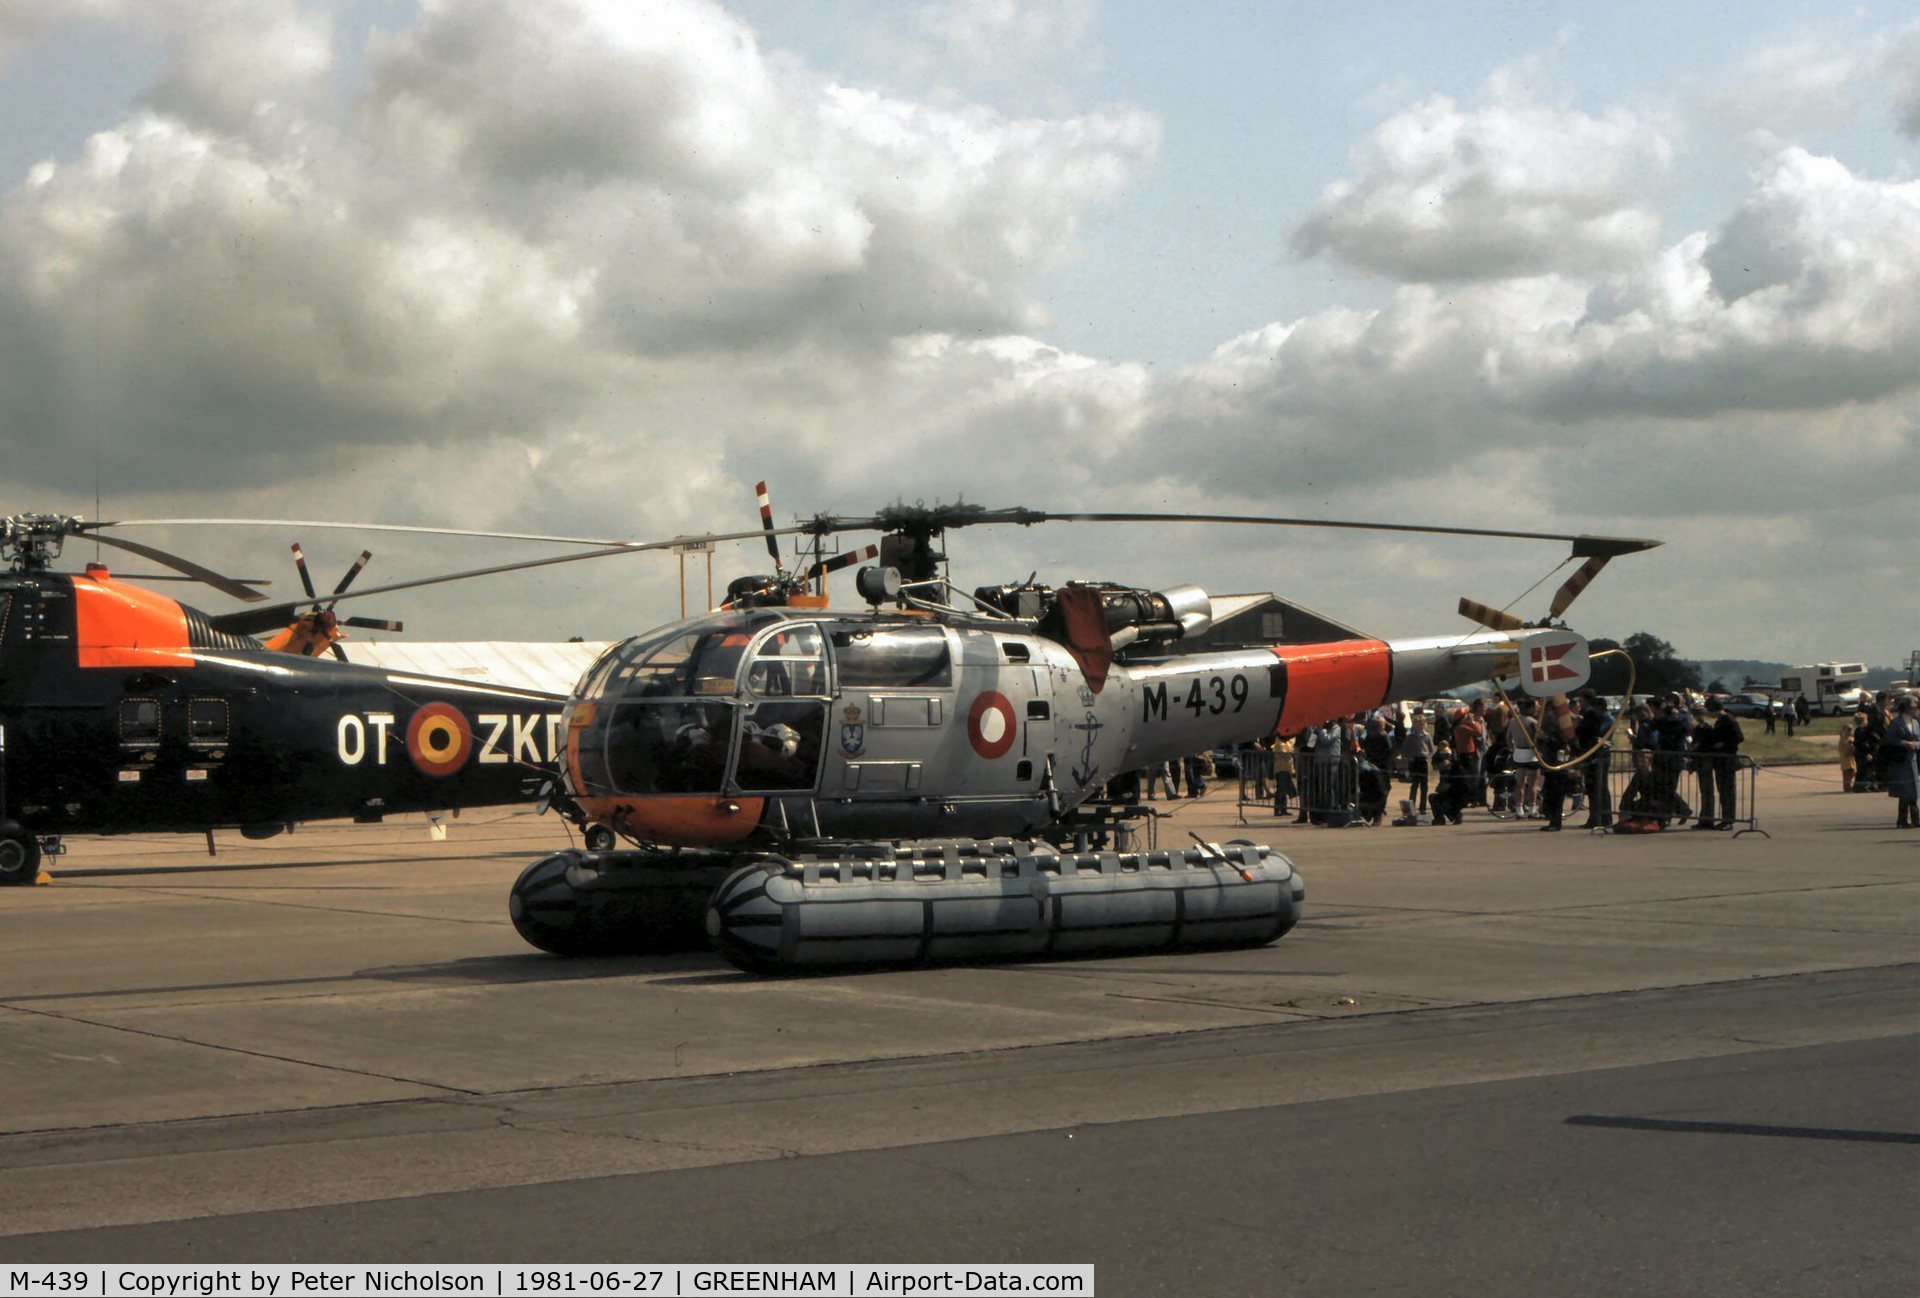 M-439, 1967 Sud SE-3160 Alouette III C/N 1439, Alouette III of Esk 722 Royal Danish Air Force on display at the 1981 Intnl Air Tattoo at RAF Greenham Common.